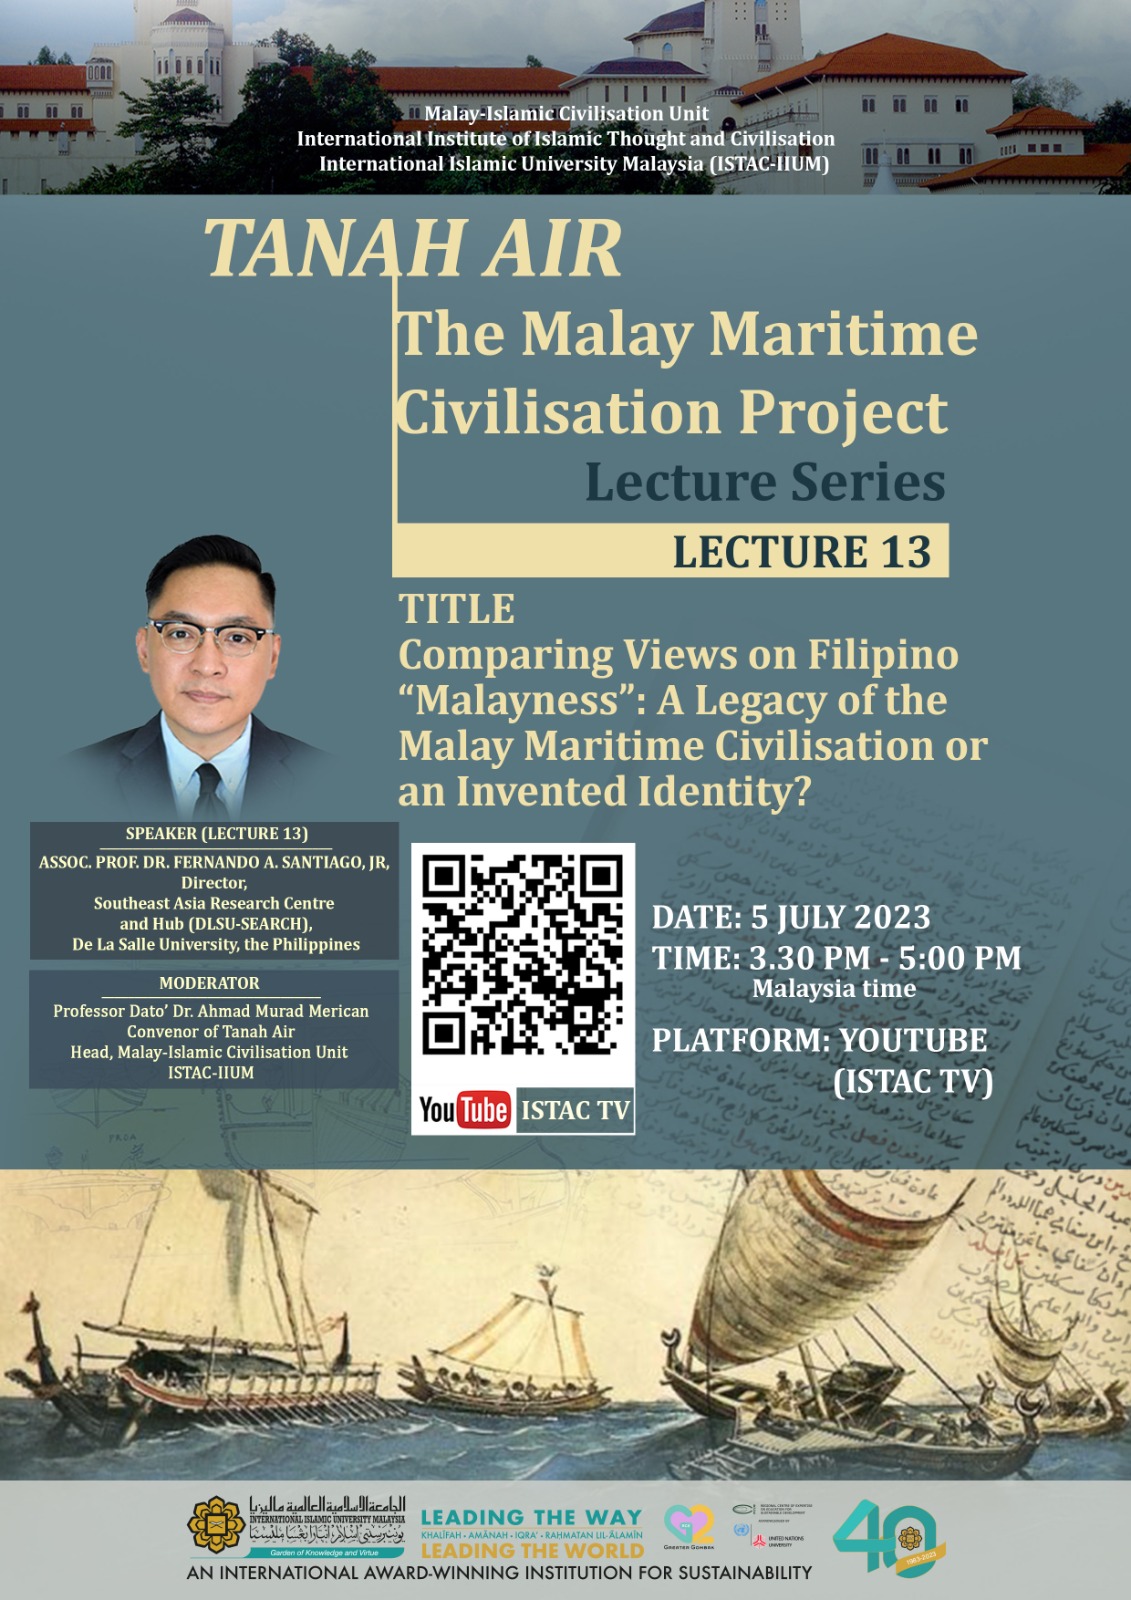 THE THIRTEENTH LECTURE OF TANAH AIR: MALAY MARITIME CIVILISATION PROJECT